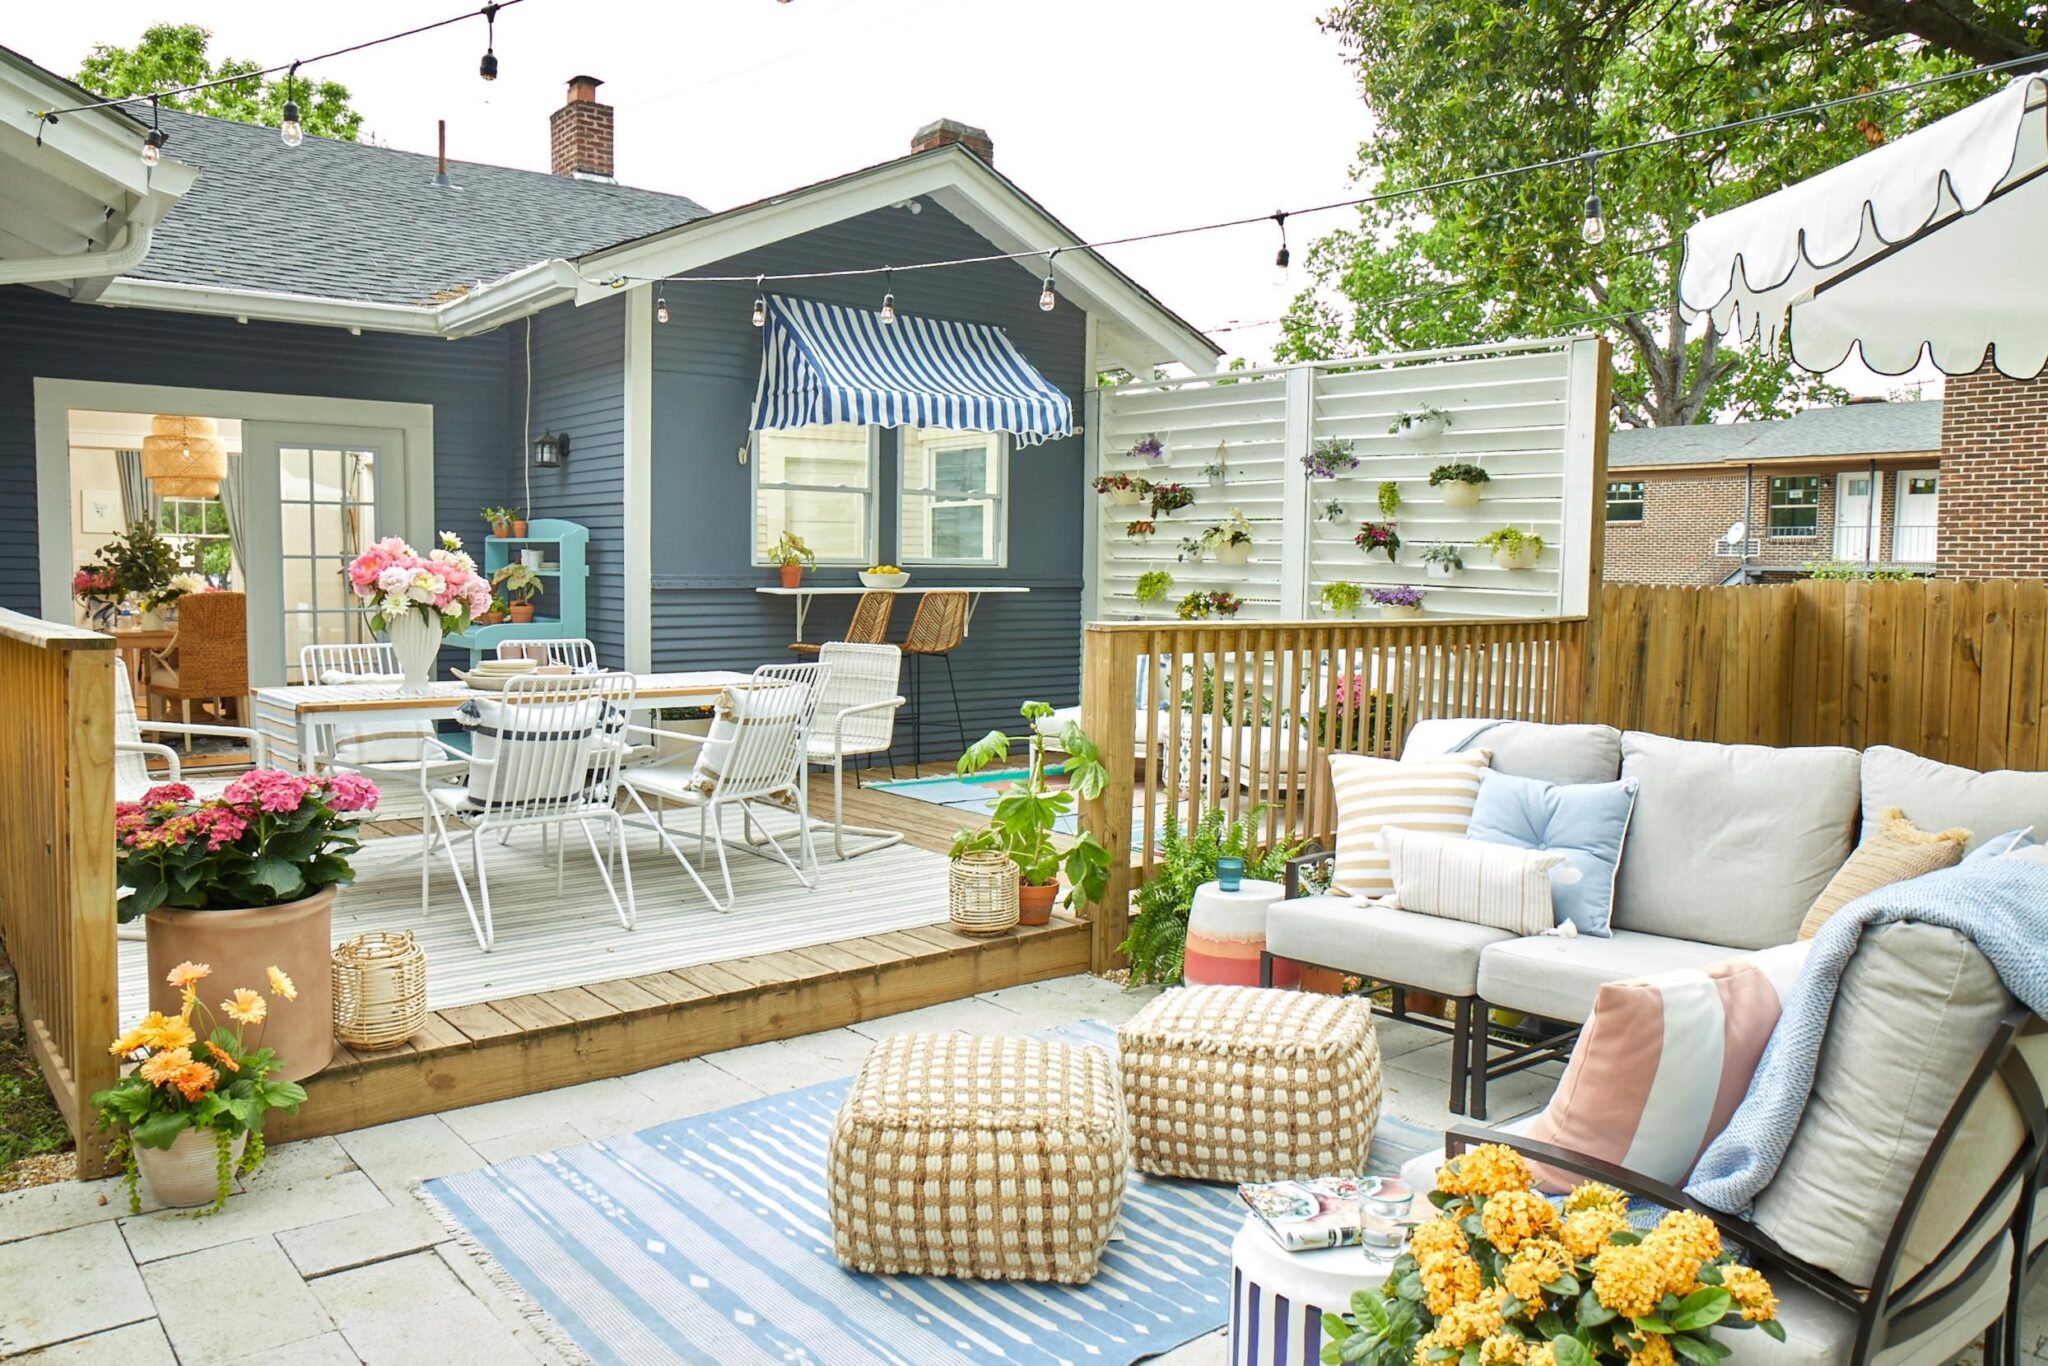 Creating an Outdoor Private Patio Oasis » Residence Style